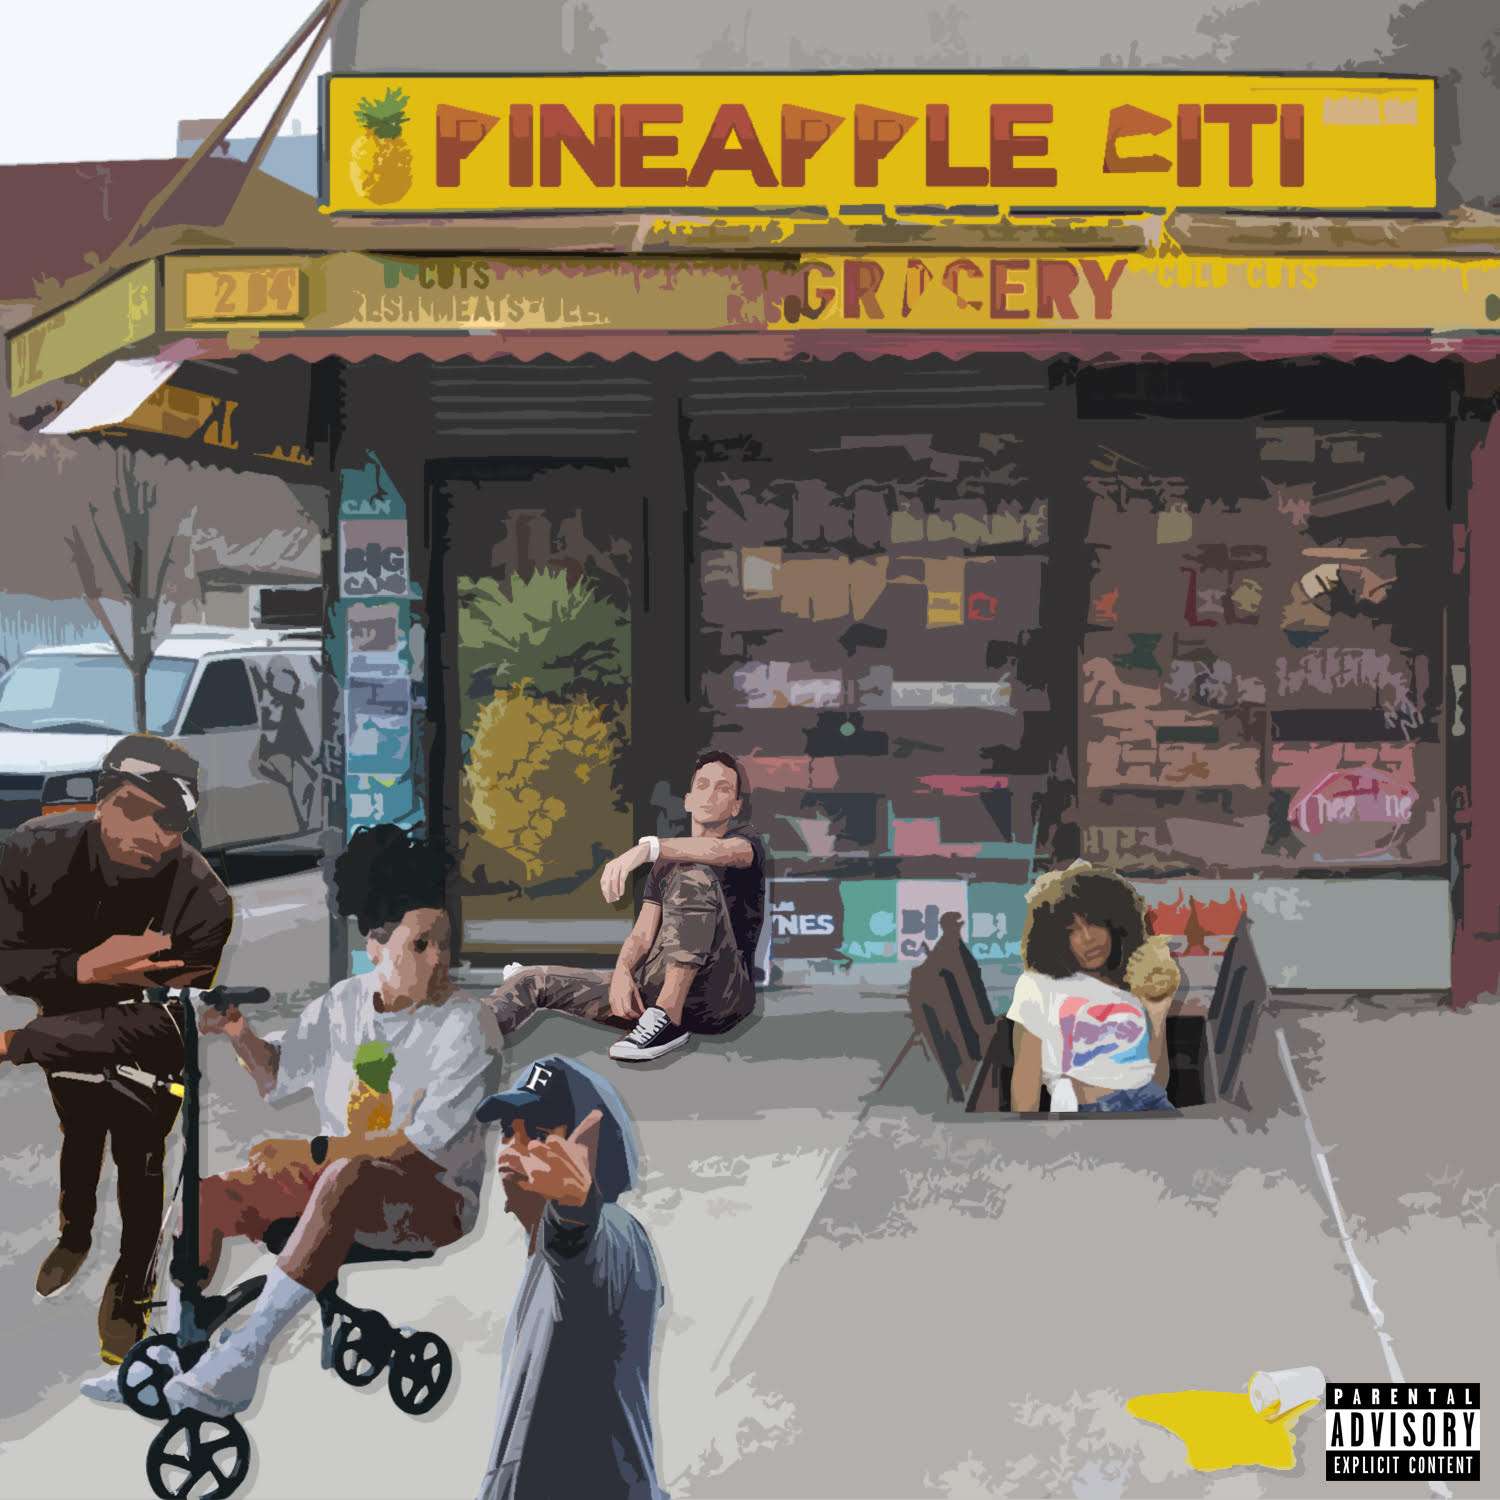 PineappleCITI releases Official Artwork & Tracklisting! Debut Album this month @pineappleciti